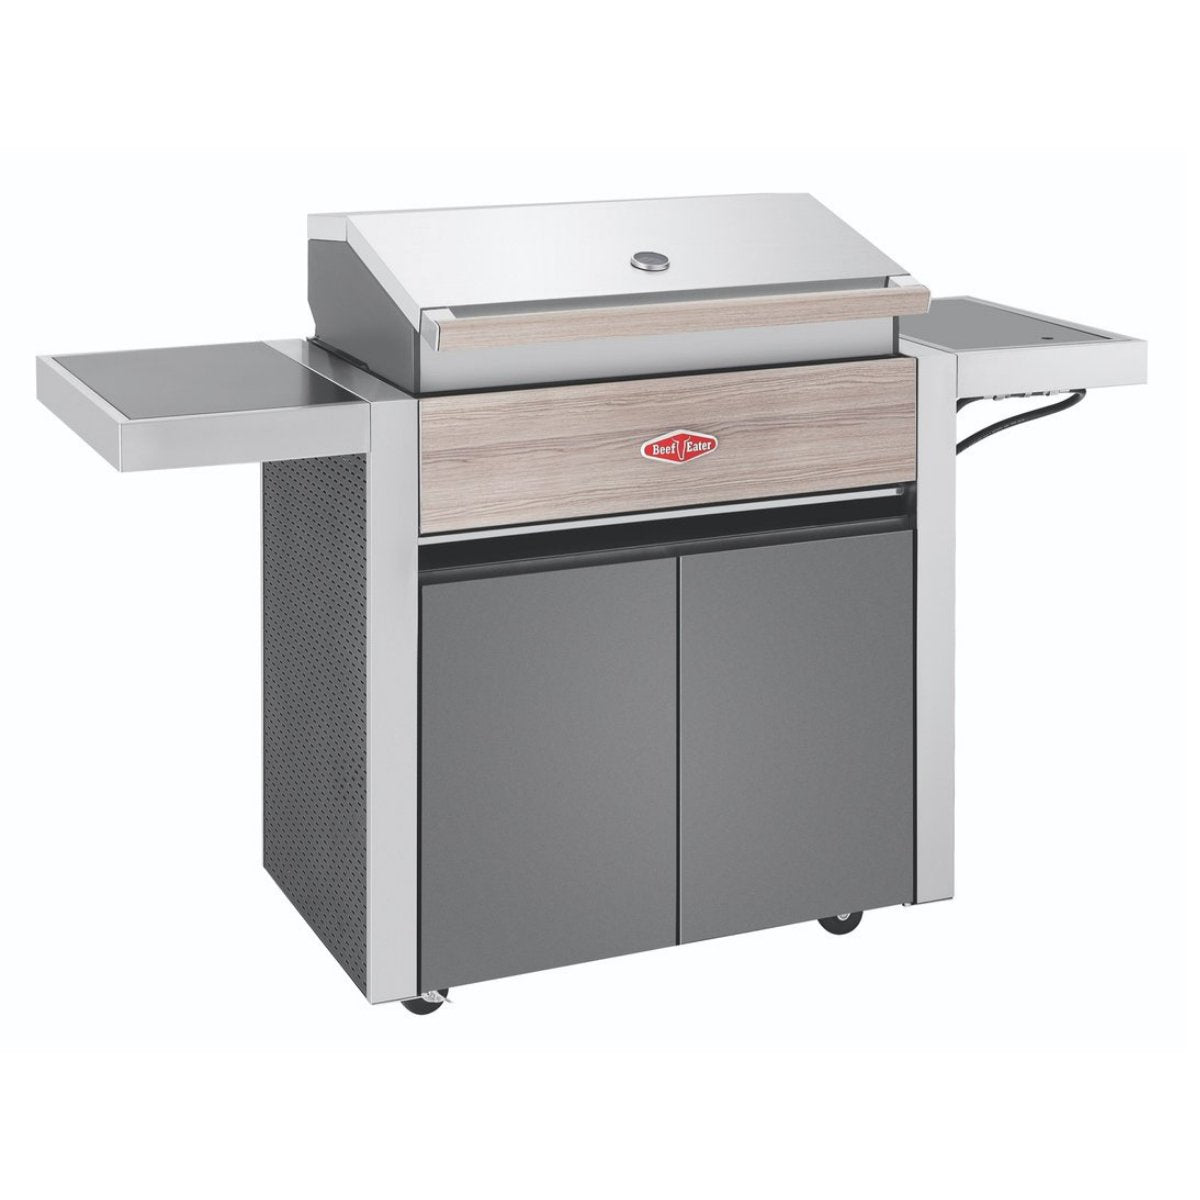 Beefeater 1500 4 Burner Grill and Side Burner with Cart - Kitchen In The Garden